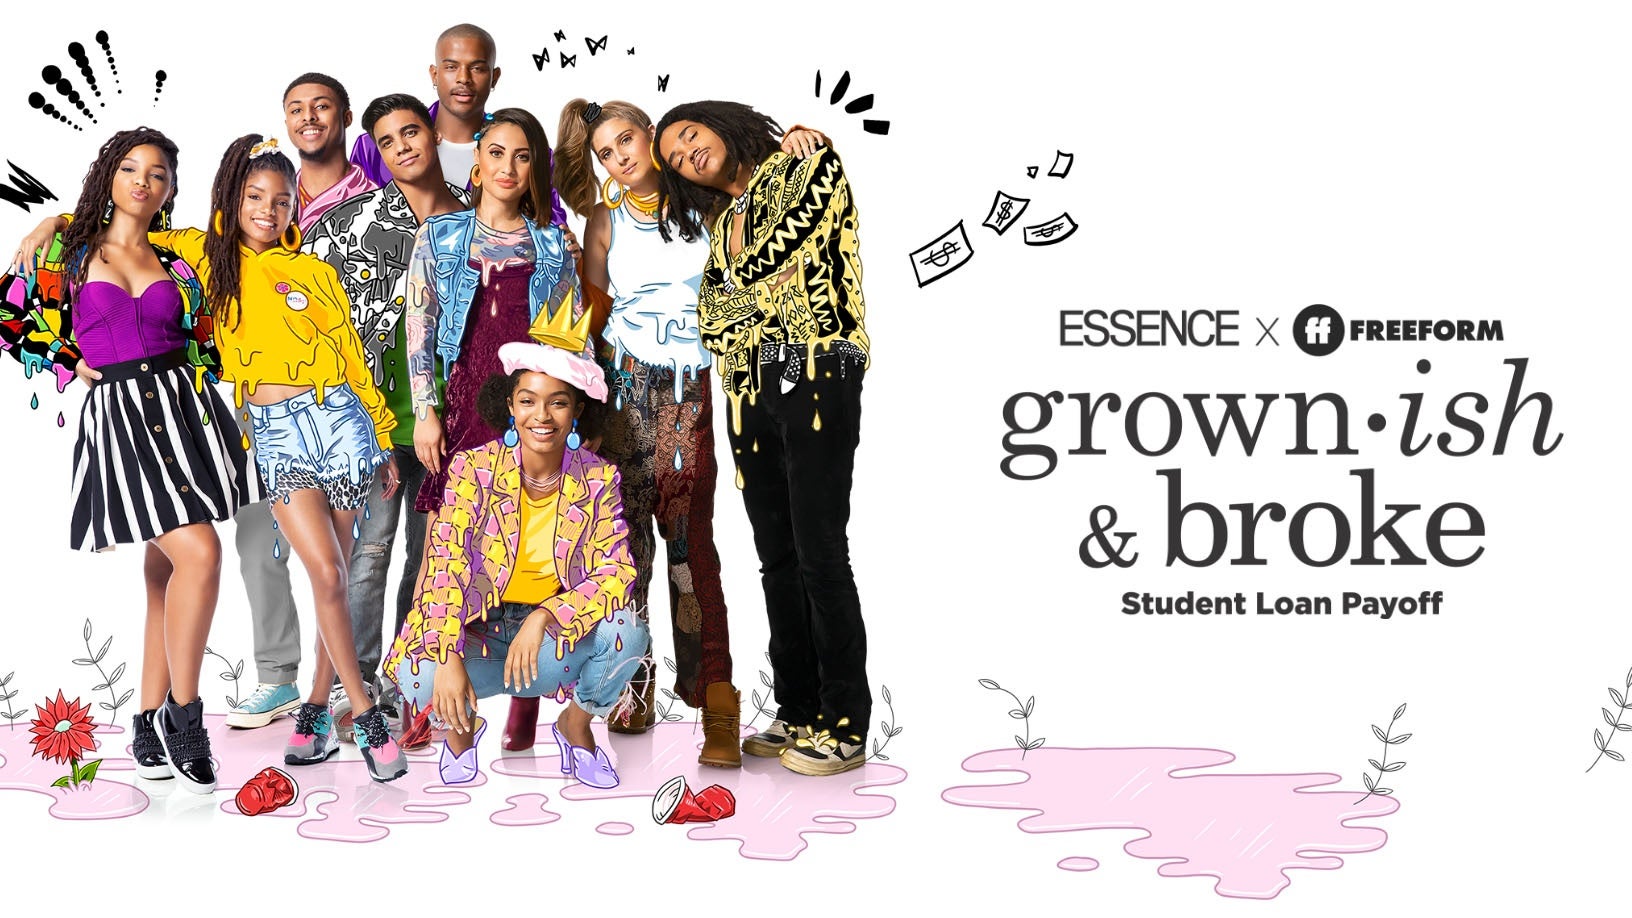 ESSENCE And Freeform Have Launched The #grown-ish & Broke-Student Loan Payoff